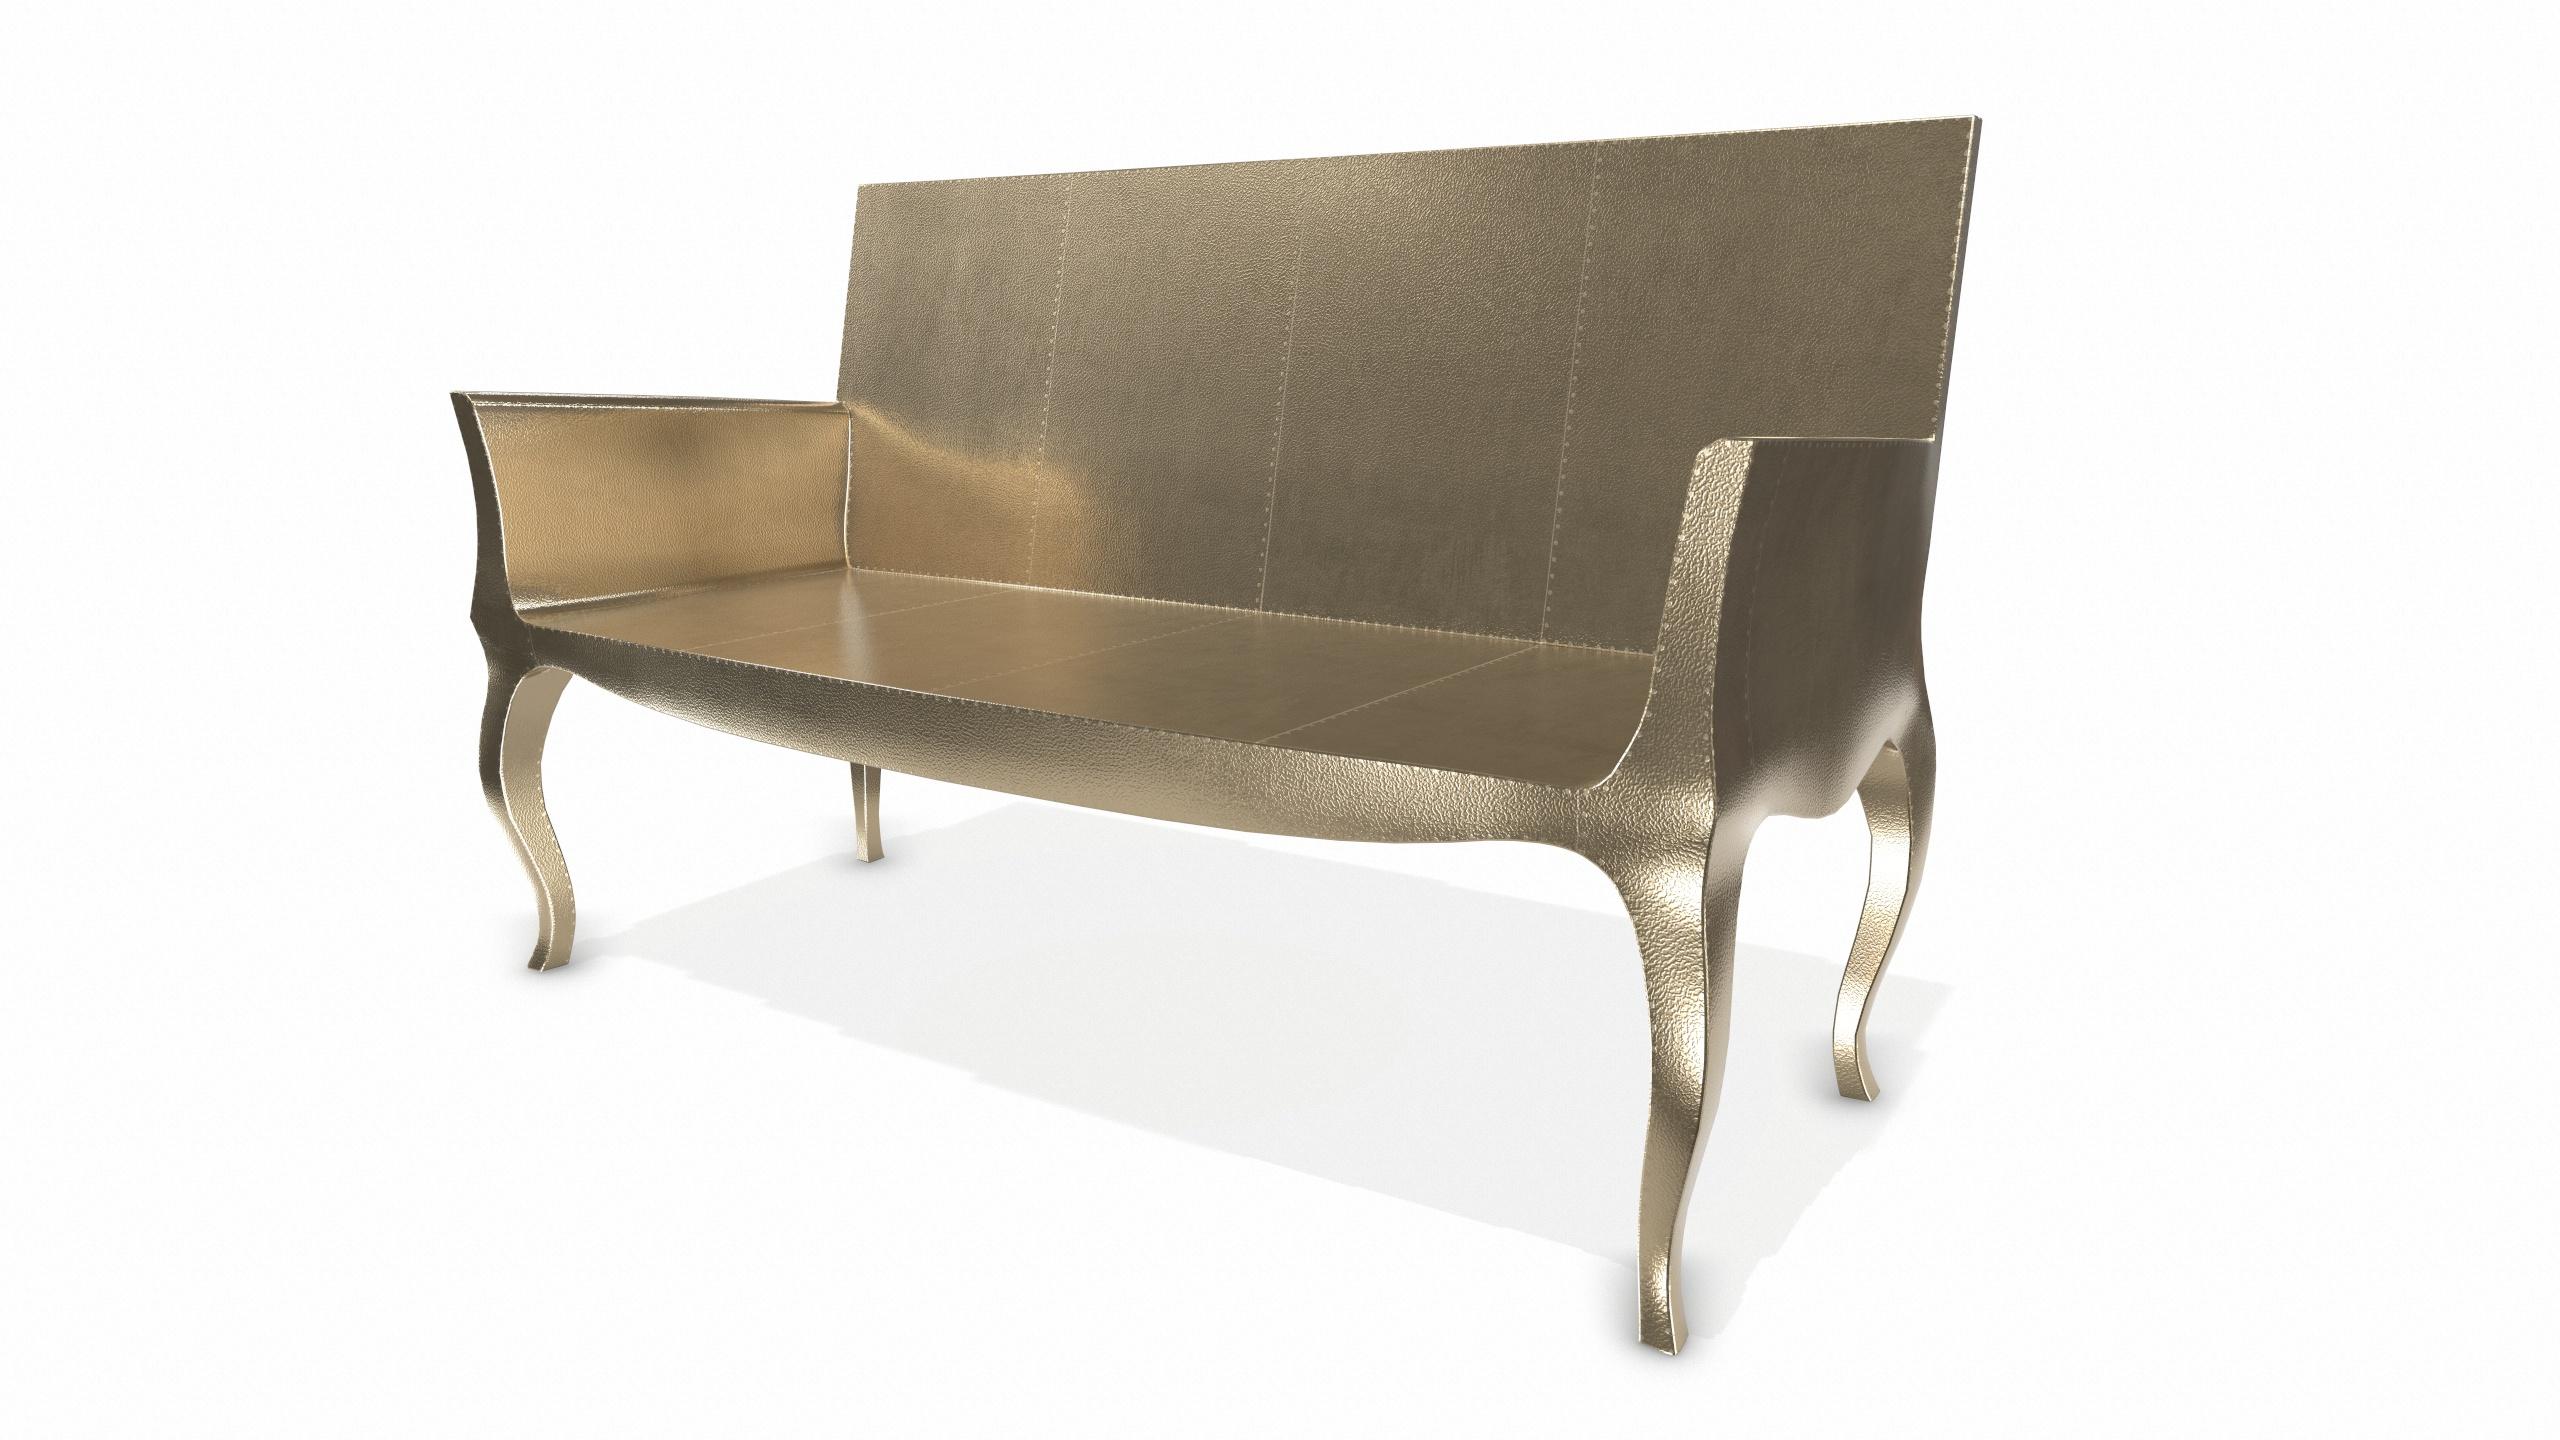 Wood Louise Settee Art Deco Canapes in Fine Hammered Brass by Paul Mathieu For Sale